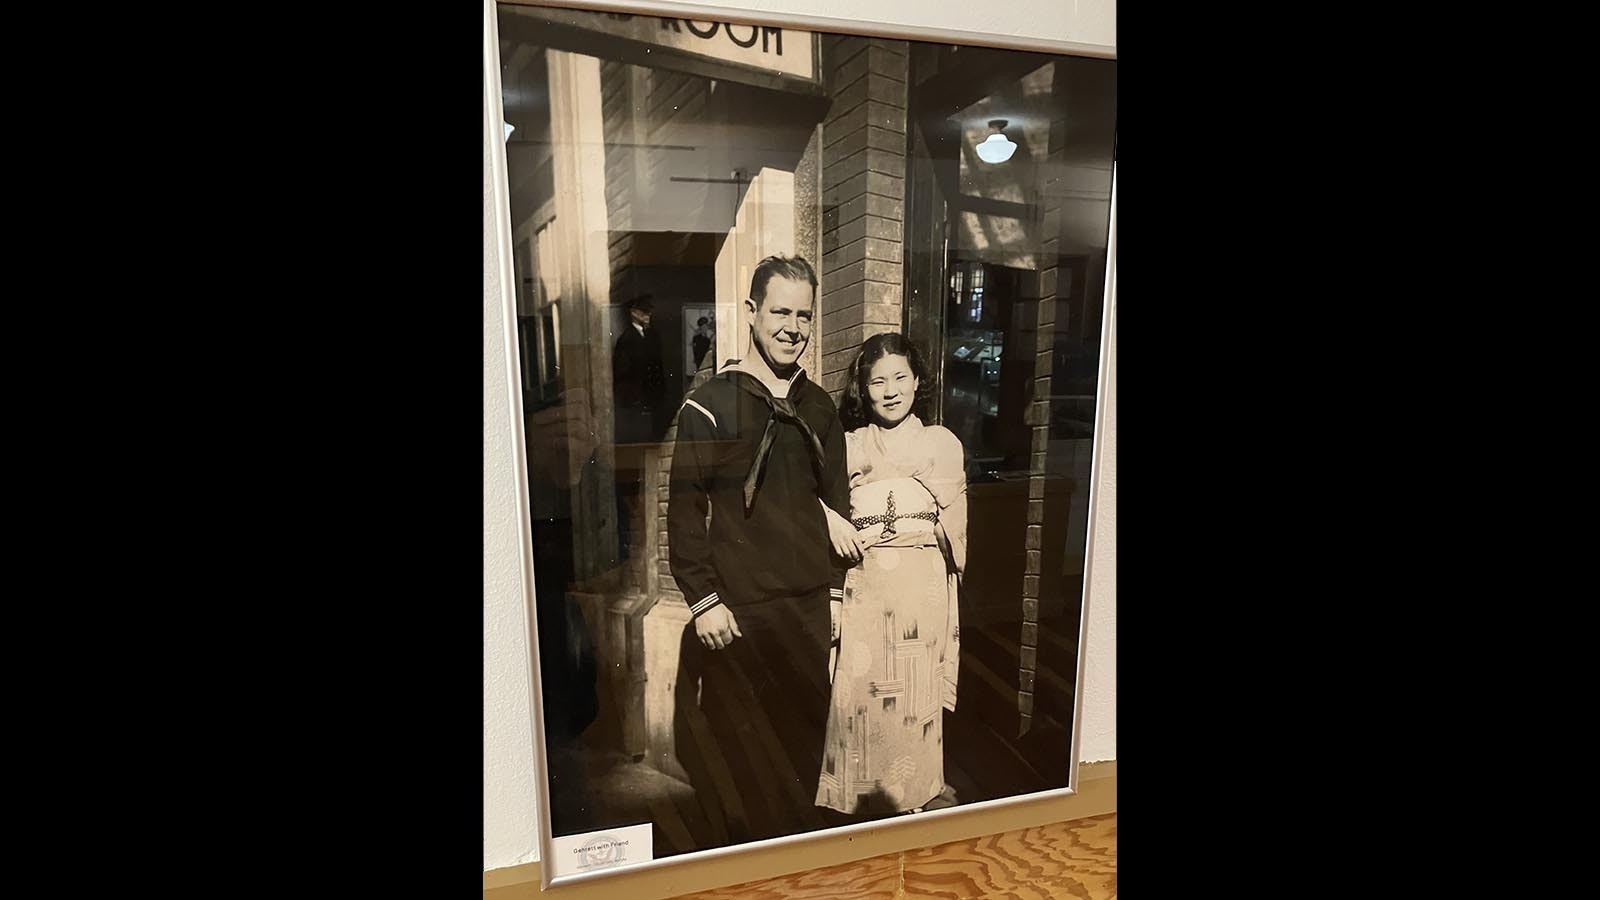 A photo of Casper sailor Clarence Gherett and a Chinese woman is part of the exhibit at the Wyoming Veterans Memorial Museum.